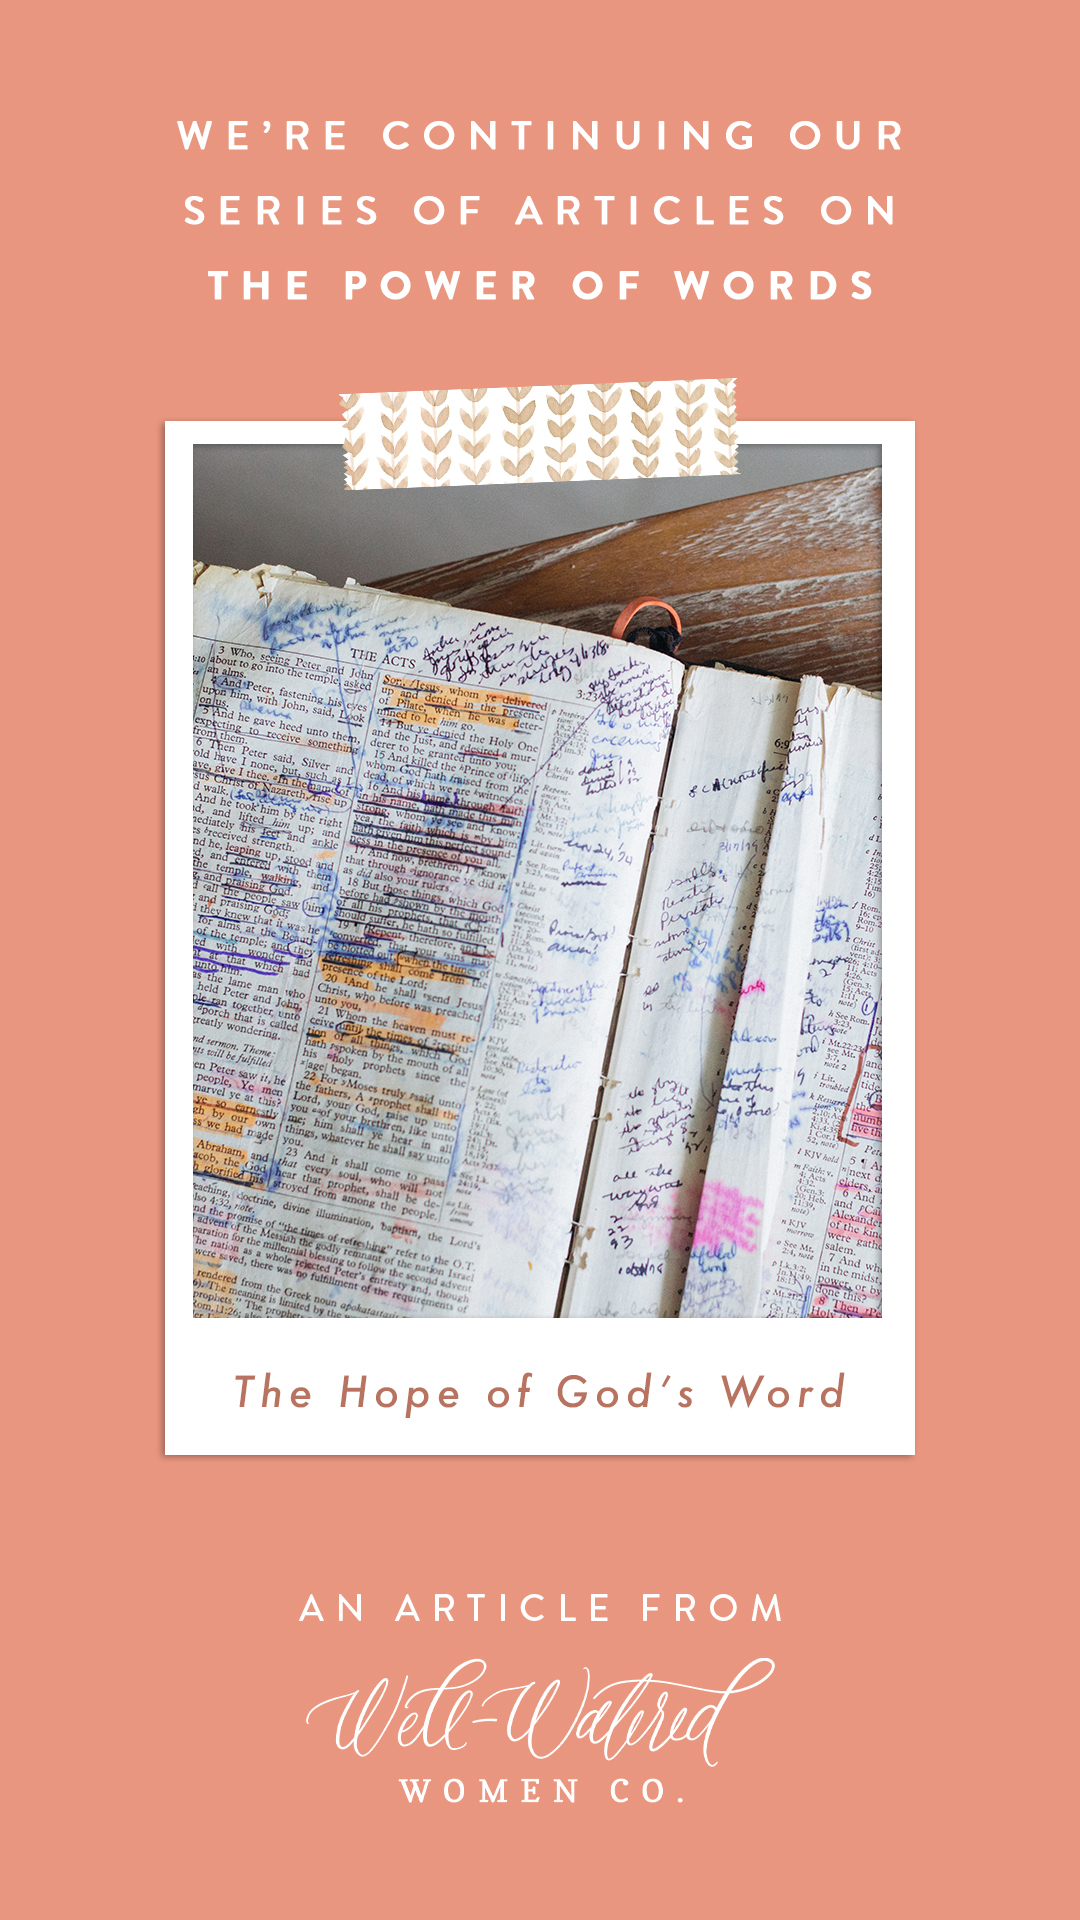 Power of Words - The Hope of God's Word - An Article by Well-Watered Women